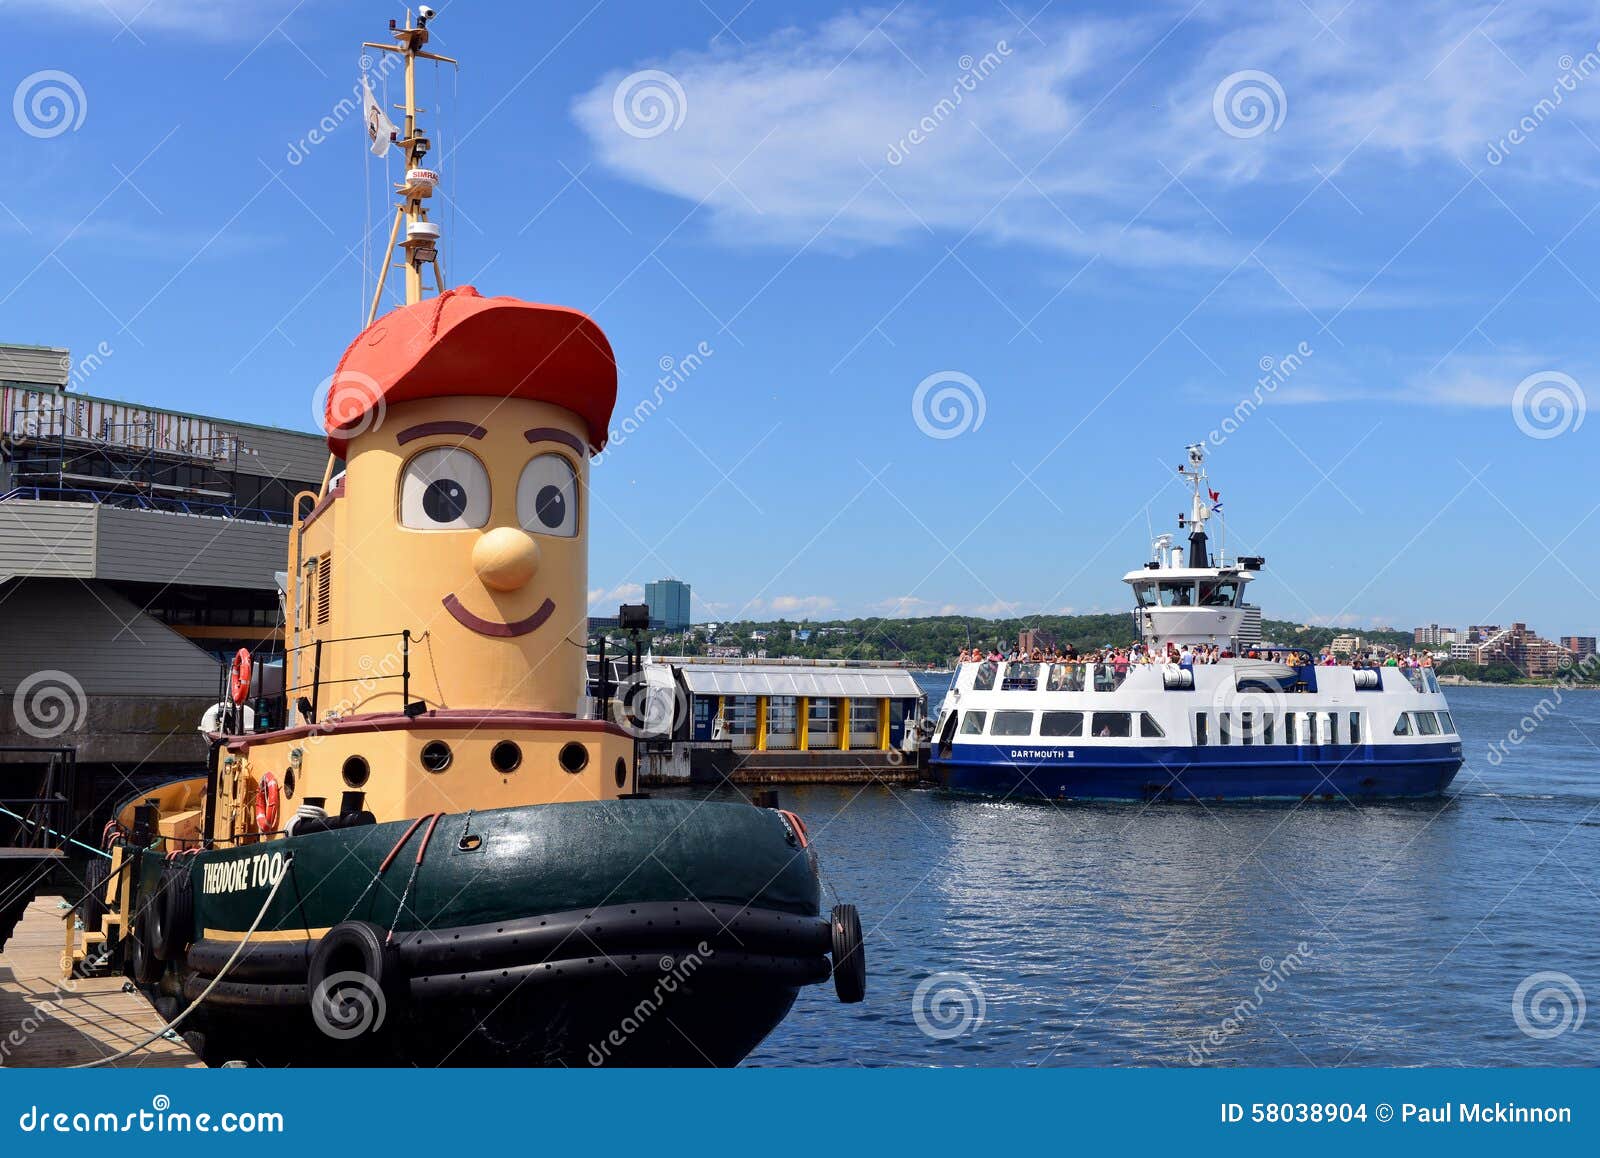 Theodore Tugboat And Dartmouth Ferry Editorial Stock Image - Image 